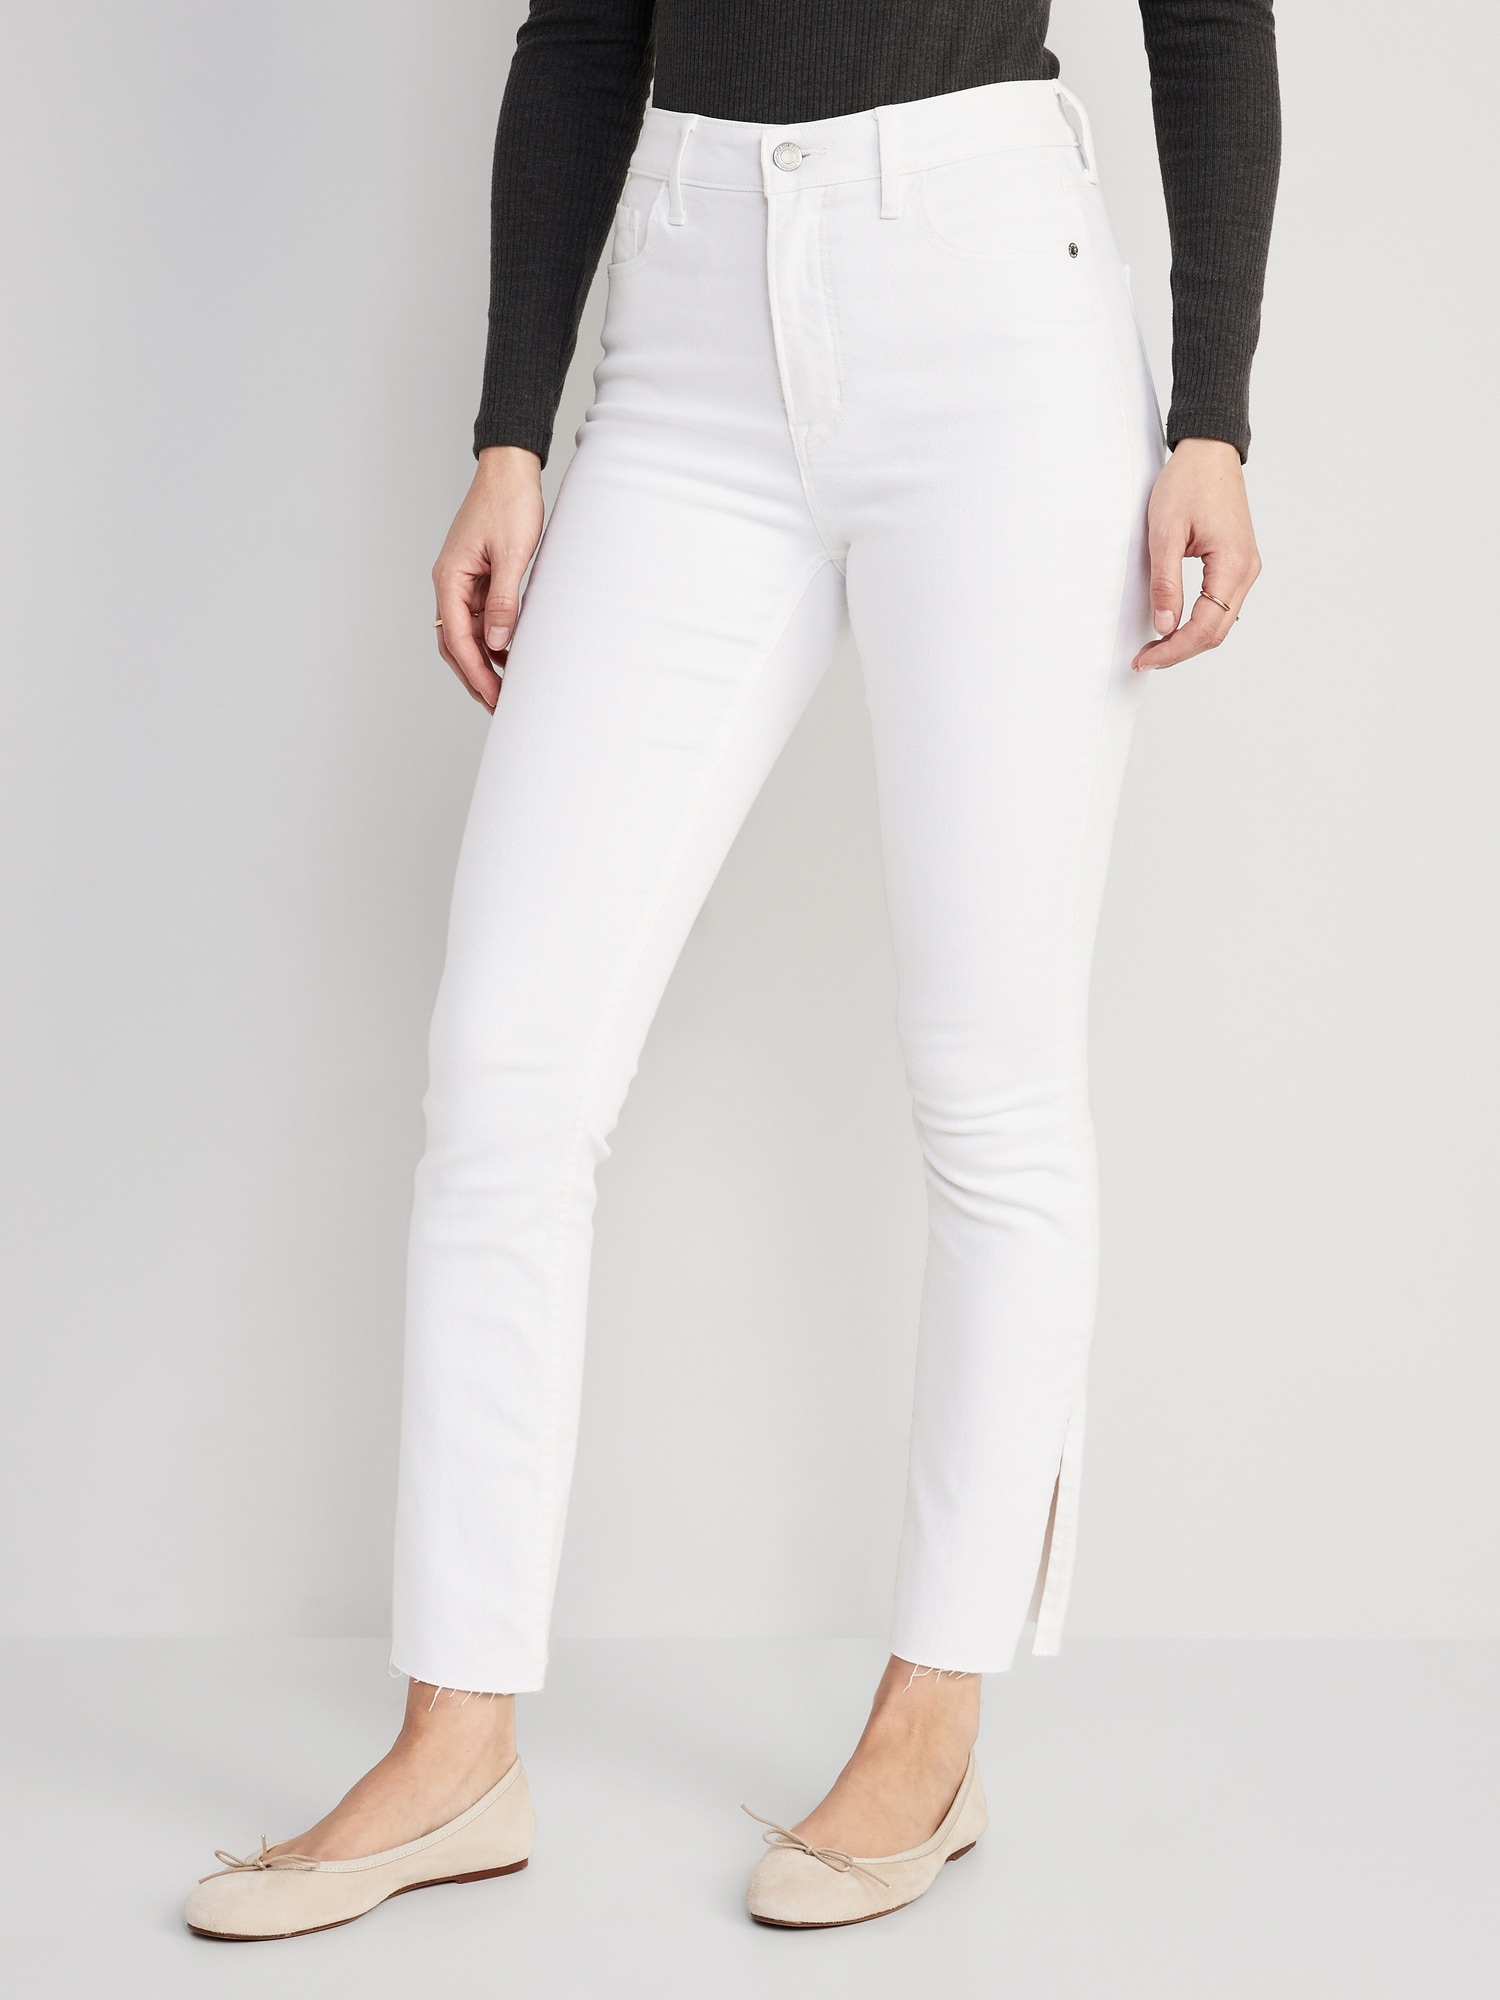 Old Navy Extra High-Waisted Rockstar 360° Stretch Super-Skinny White Side-Split Jeans for Women white. 1